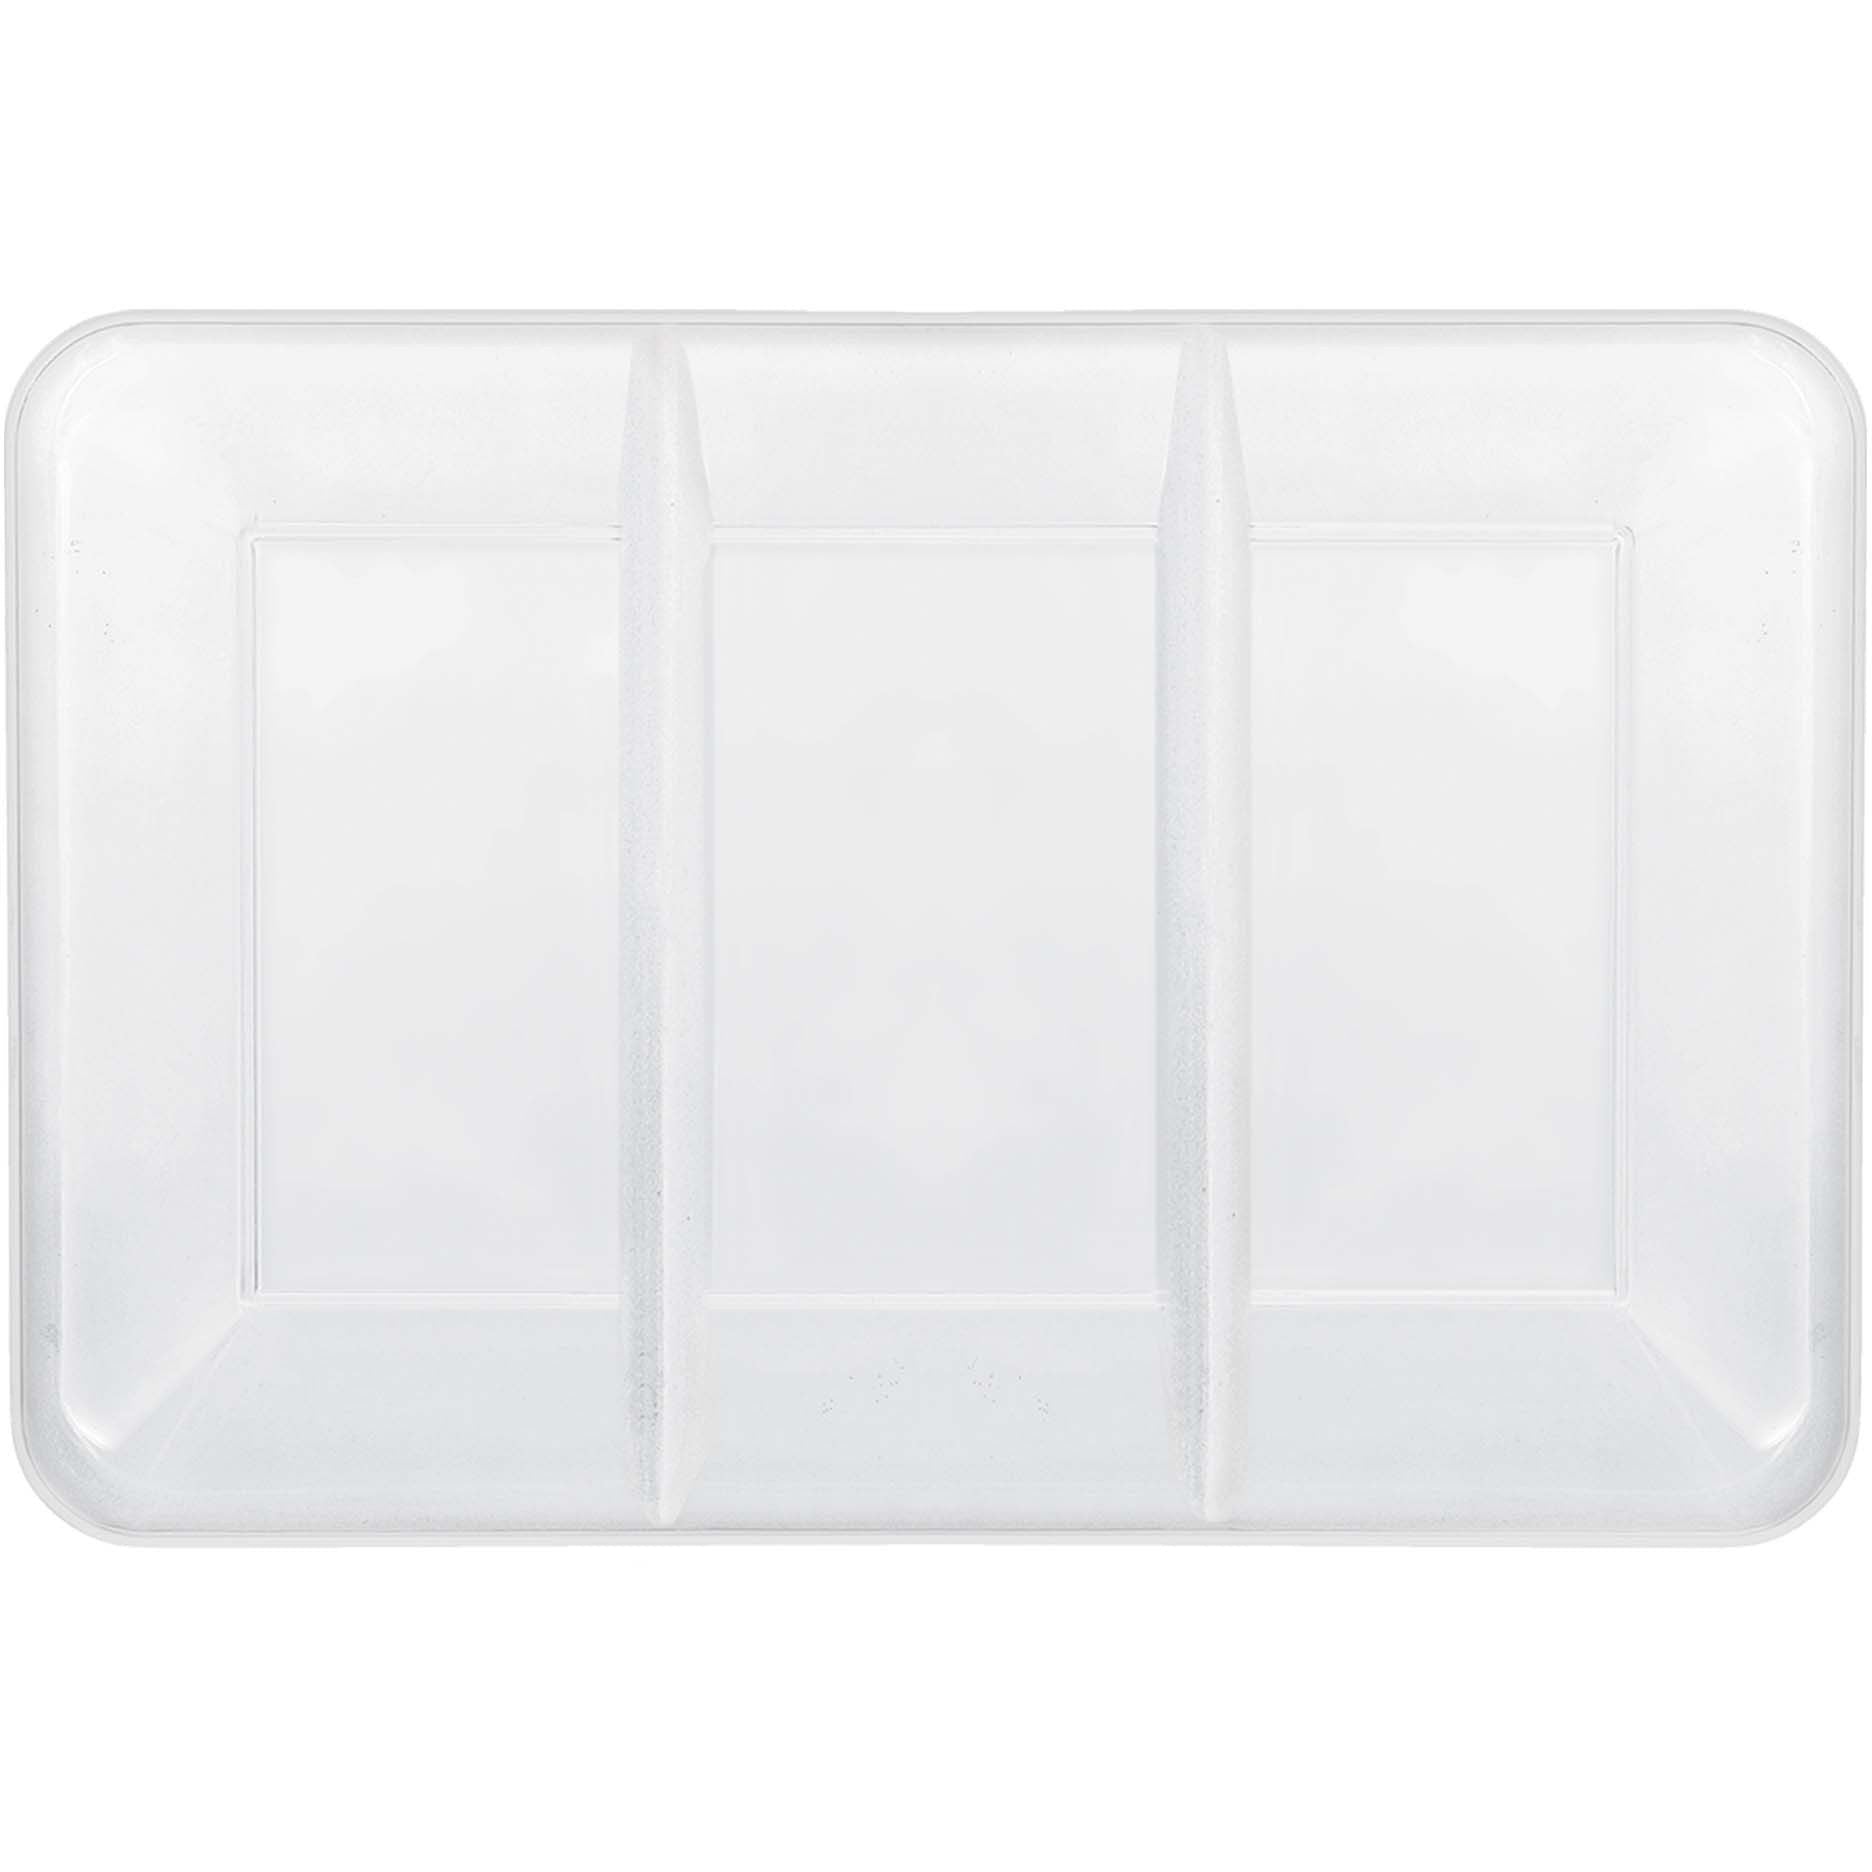 Amscan BASIC White Compartment Tray